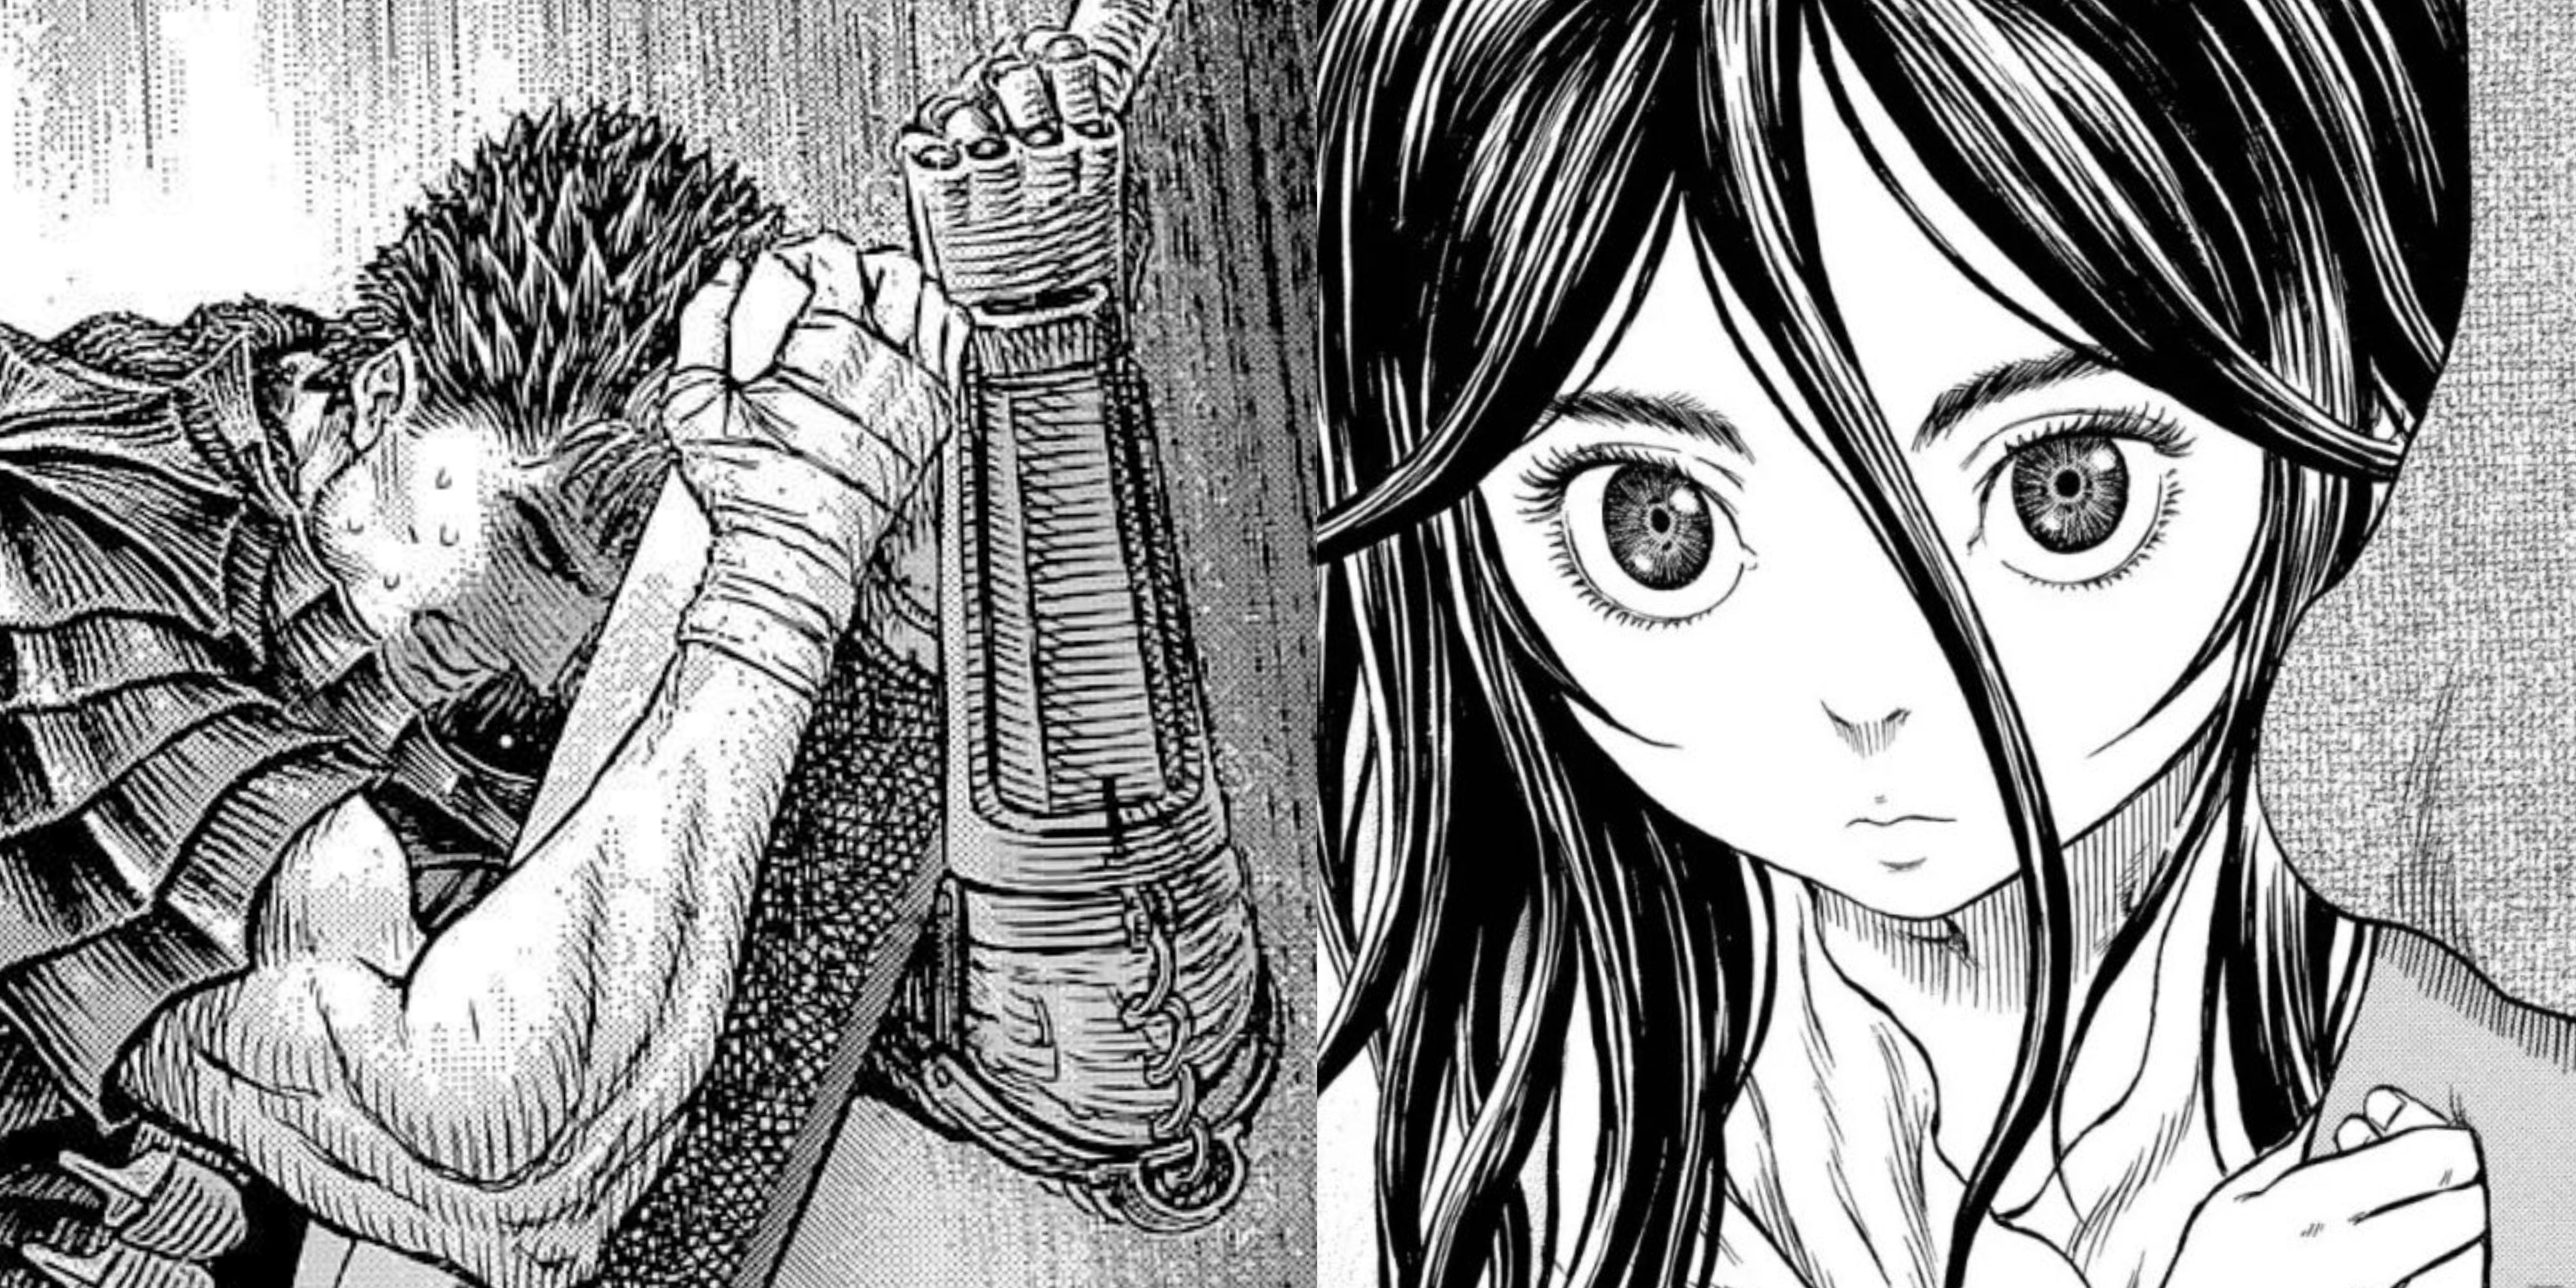 Berserk is Back in Action With a New Manga Arc